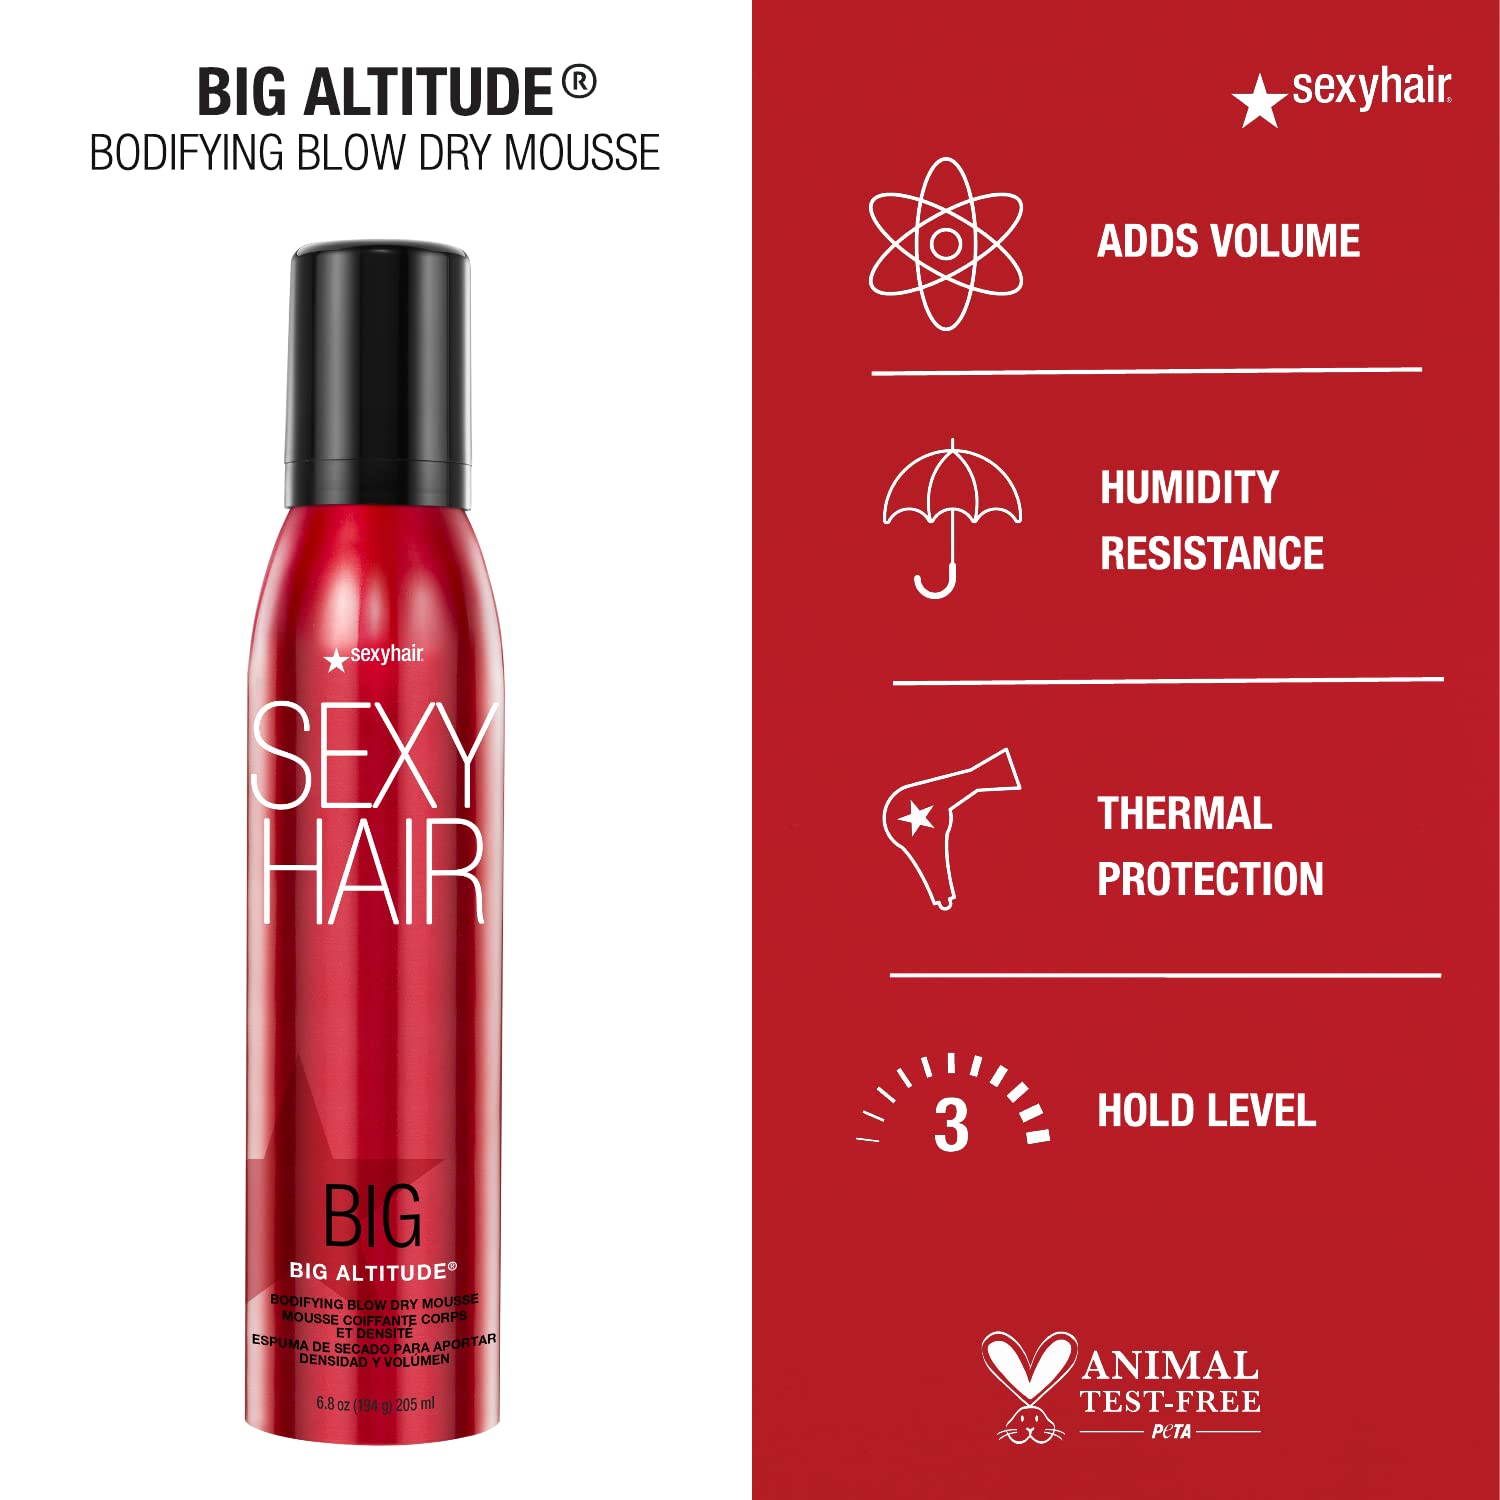 Big Sexy Hair Big Altitude Bodifying Blow Dry Mousse Benefits